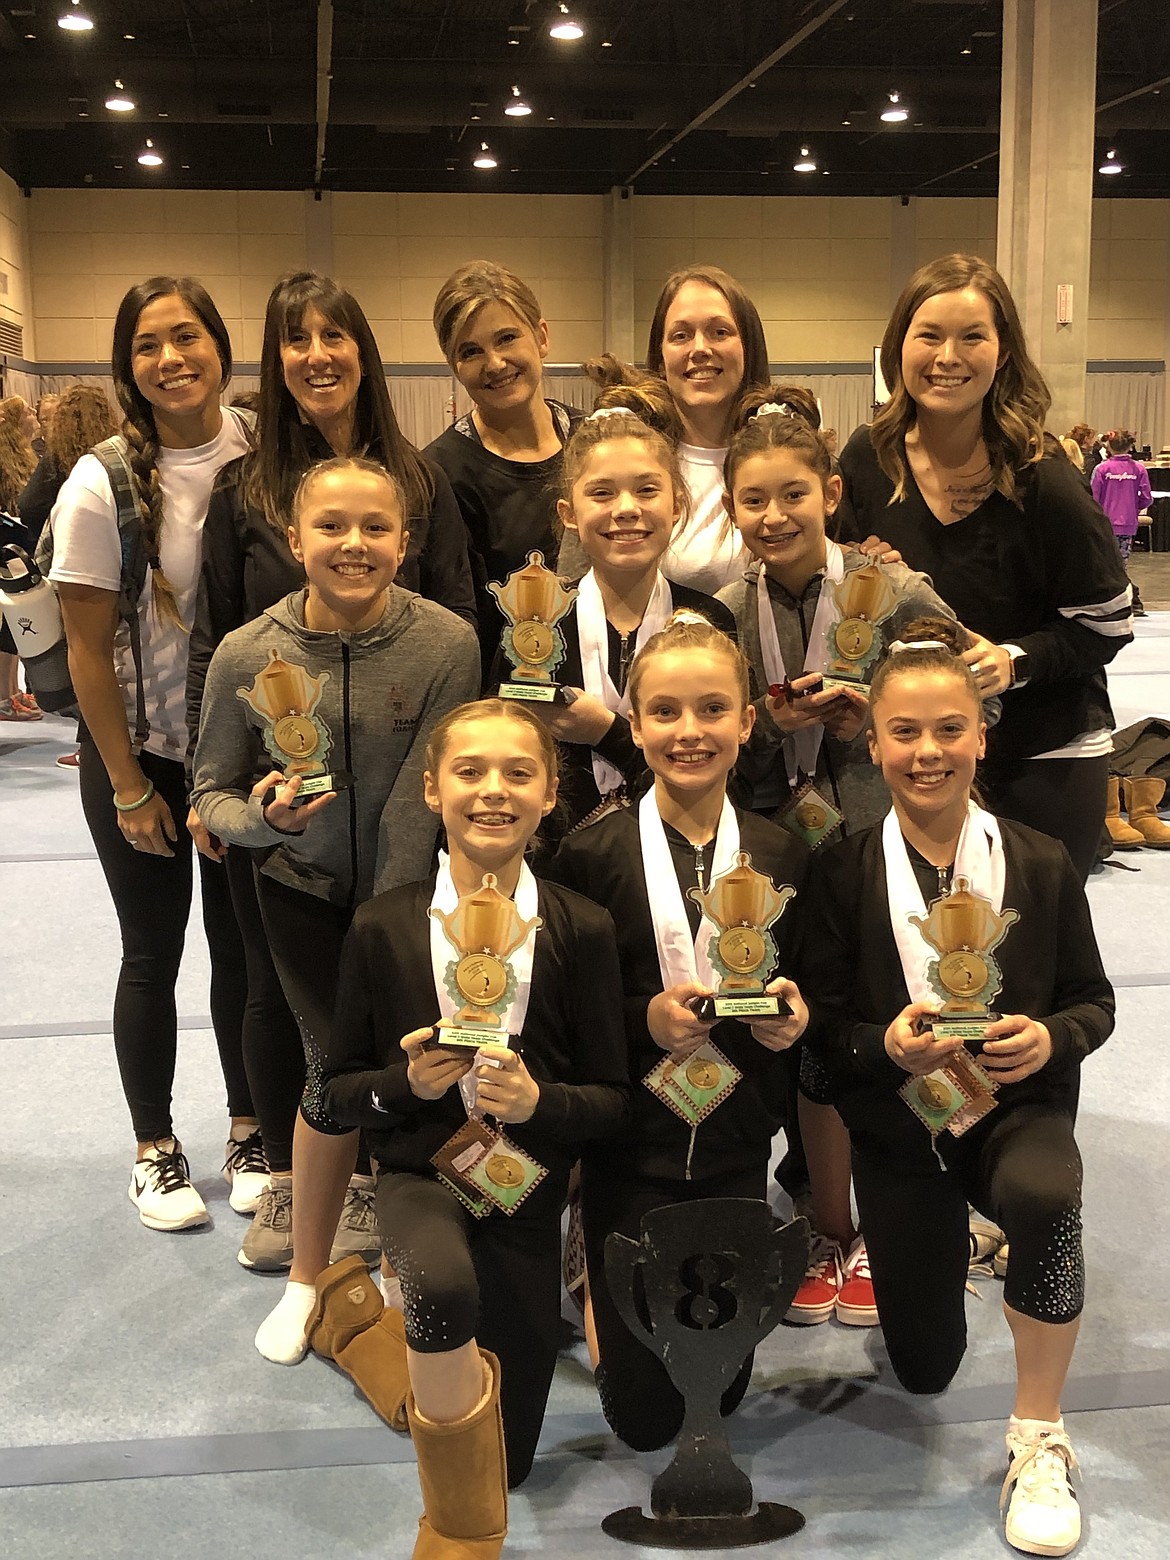 Courtesy photo
Idaho took 8th out of 17 states competing in Level 7 at the National Judges Cup in Overland Park, Kan. In the front row from left are Hannah Crawford (Boise), Presleigh Hines (Boise) and Hannah Milne (Driggs); middle row from left, Madalyn McCormick (Coeur d&#146;Alene), Macy Crawford (Boise) and Nikki Lavarello (Boise); and back row from left, coaches Meghan Henze (Boise), Cheri Milne (Driggs), Barbara DePasquale (Coeur d&#146;Alene), Natalie Lee (Boise) and Kelsey Kato (Coeur d&#146;Alene).